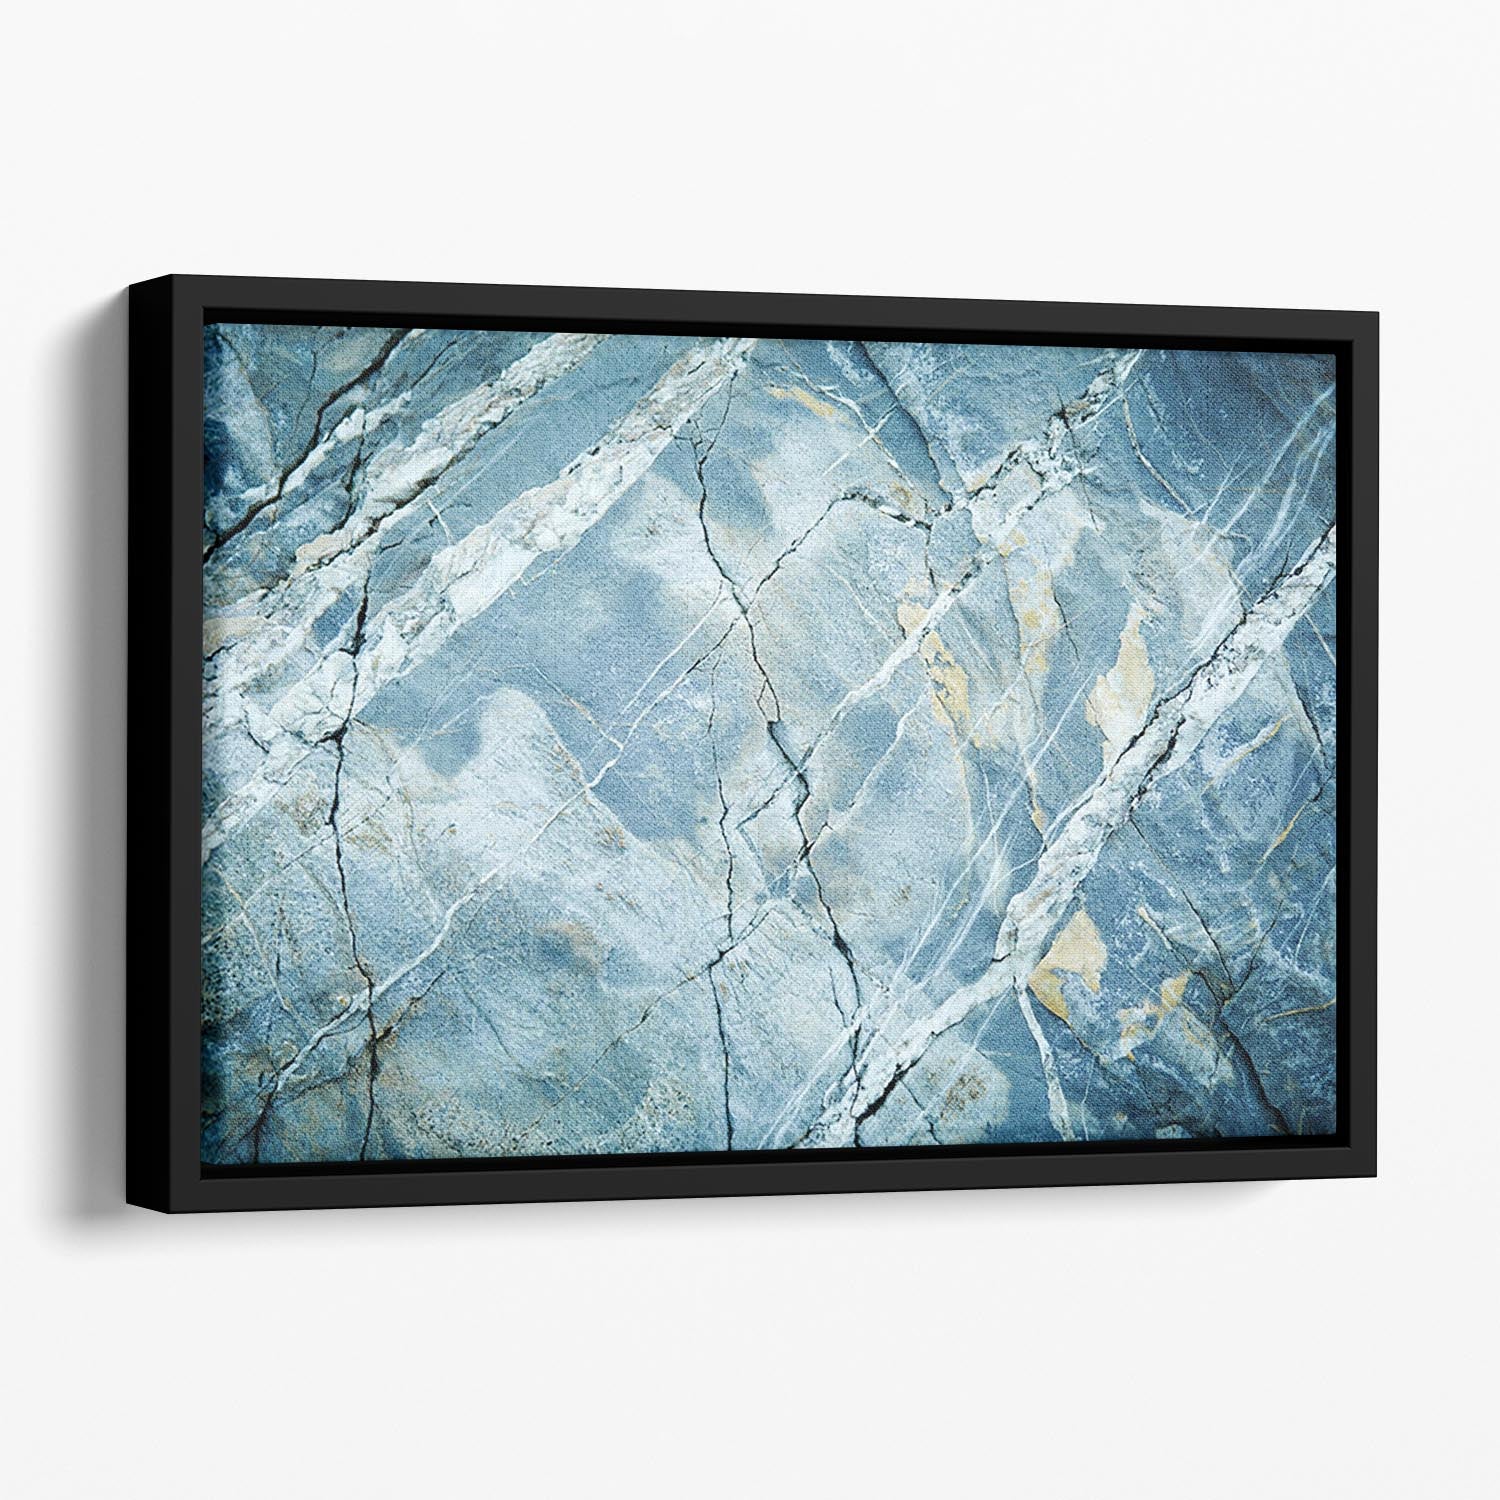 Grey and Light Blue Stone Marble Floating Framed Canvas - Canvas Art Rocks - 1